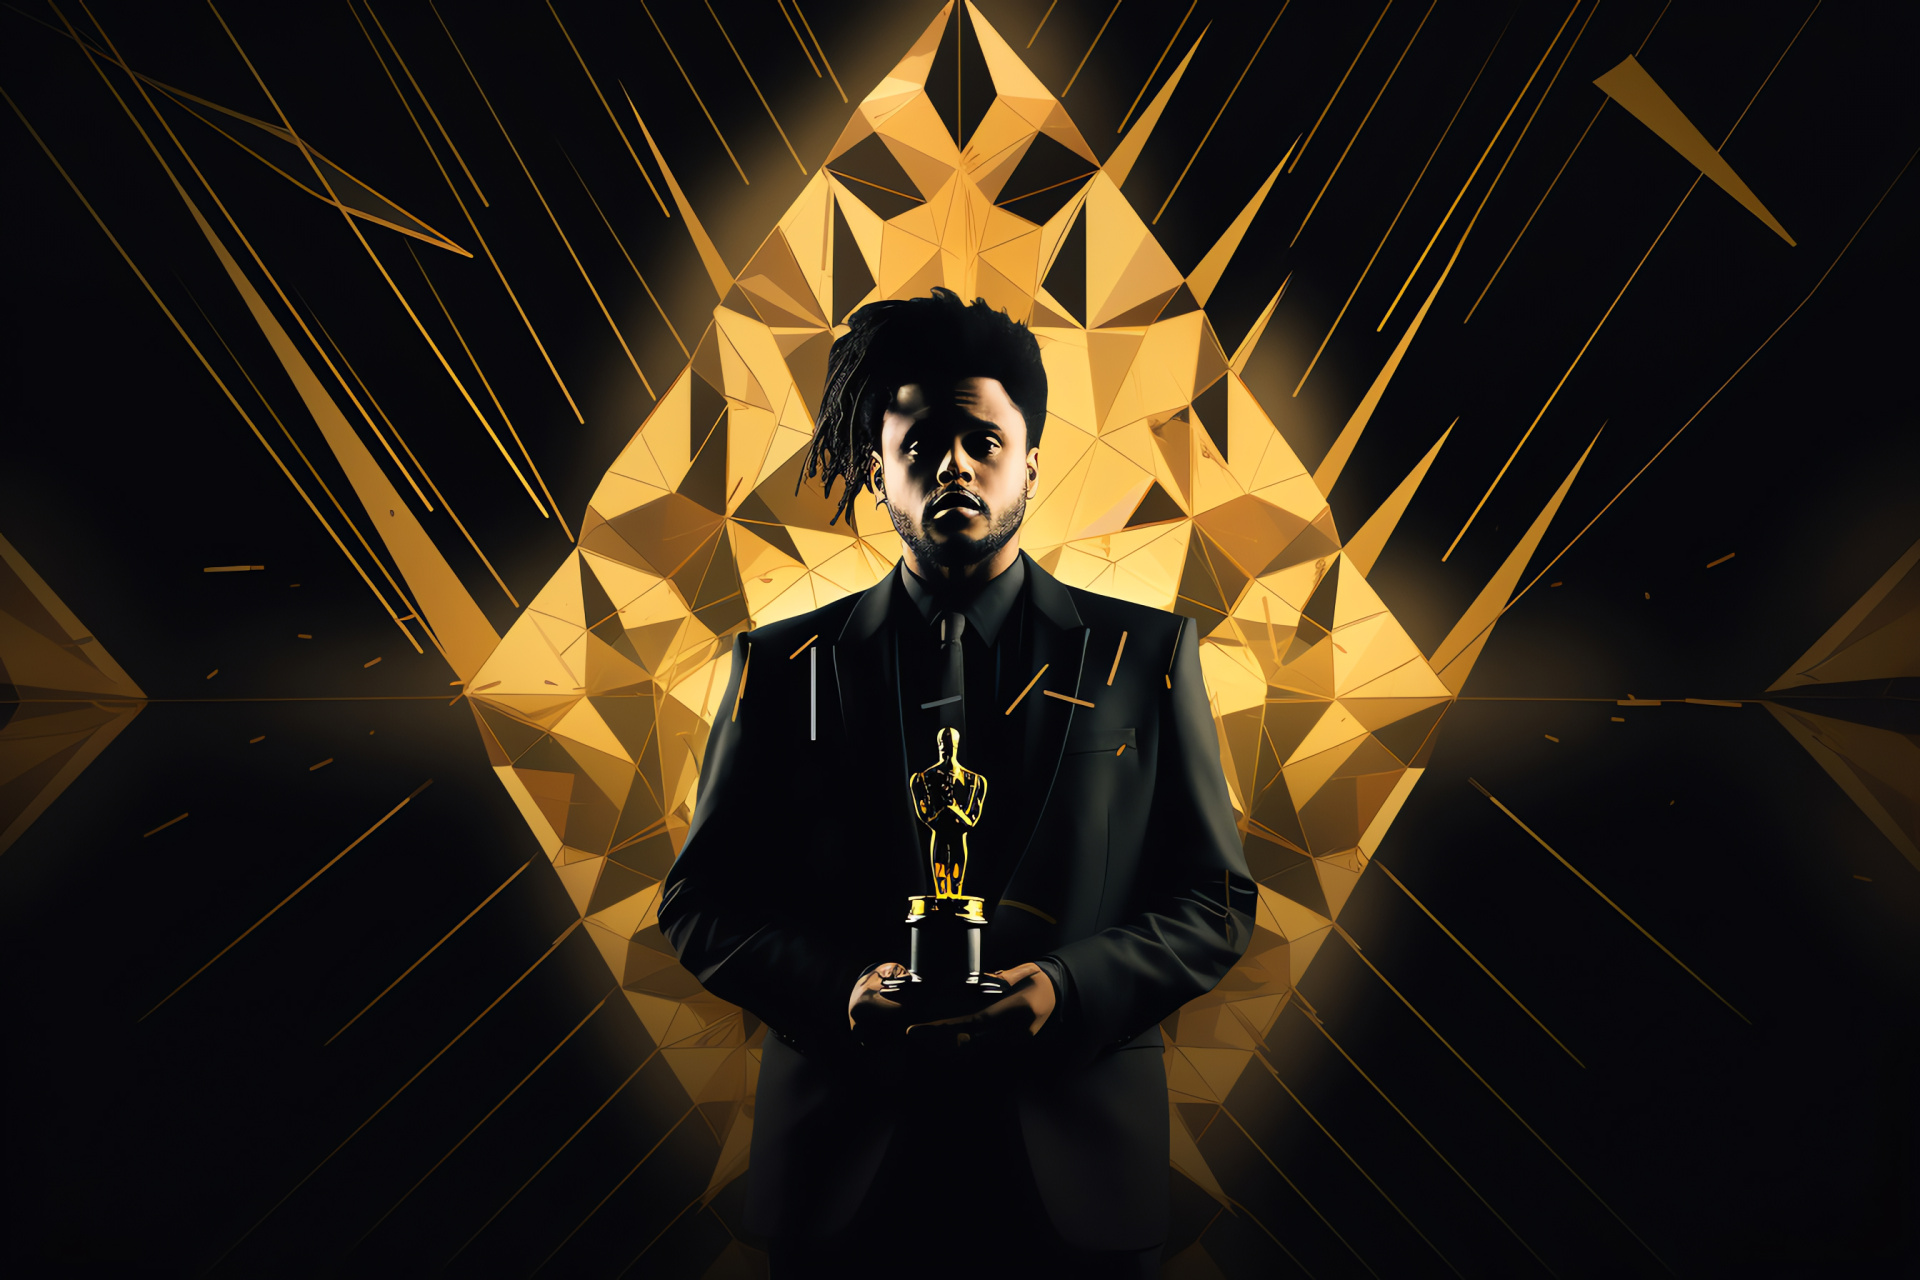 The Weeknd's stoic expression, classic black suit, coveted golden trophy in hand, intriguing visual glitch effects, HD Desktop Wallpaper